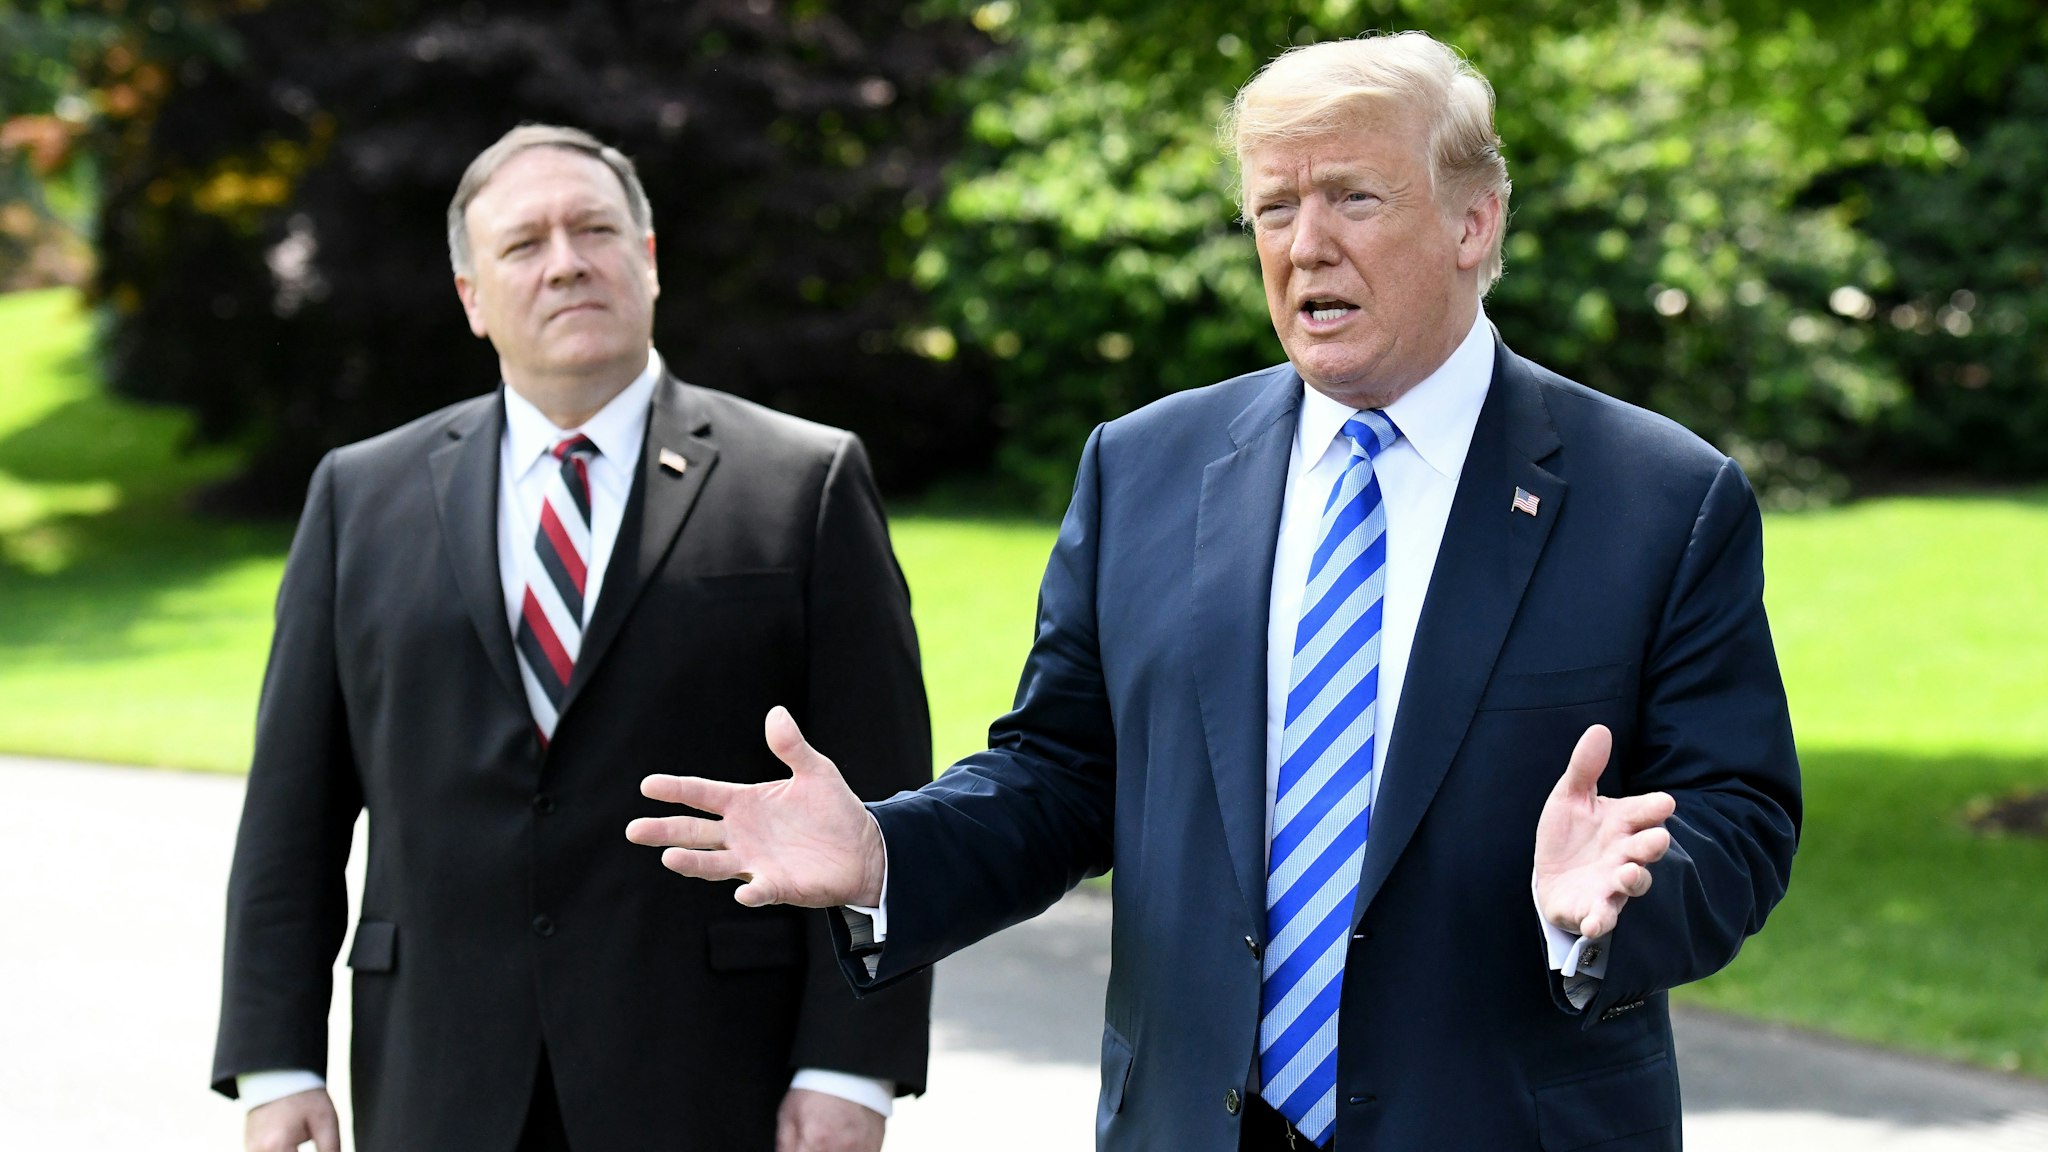 WASHINGTON, DC - JUNE 01: Secretary of State Mike Pompeo listens as US President Donald Trump speaks to the press after meeting with Kim Yong Chol, former North Korean military intelligence chief and one of leader Kim Jong Un's closest aides, on the South Lawn of the White House on June 1, 2018 in Washington, DC. Both Trump and Kim Yong Chol are trying to salvage a recently canceled historic summit between US President Donald Trump and North Korean leader Kim Jong-un scheduled for June 12.